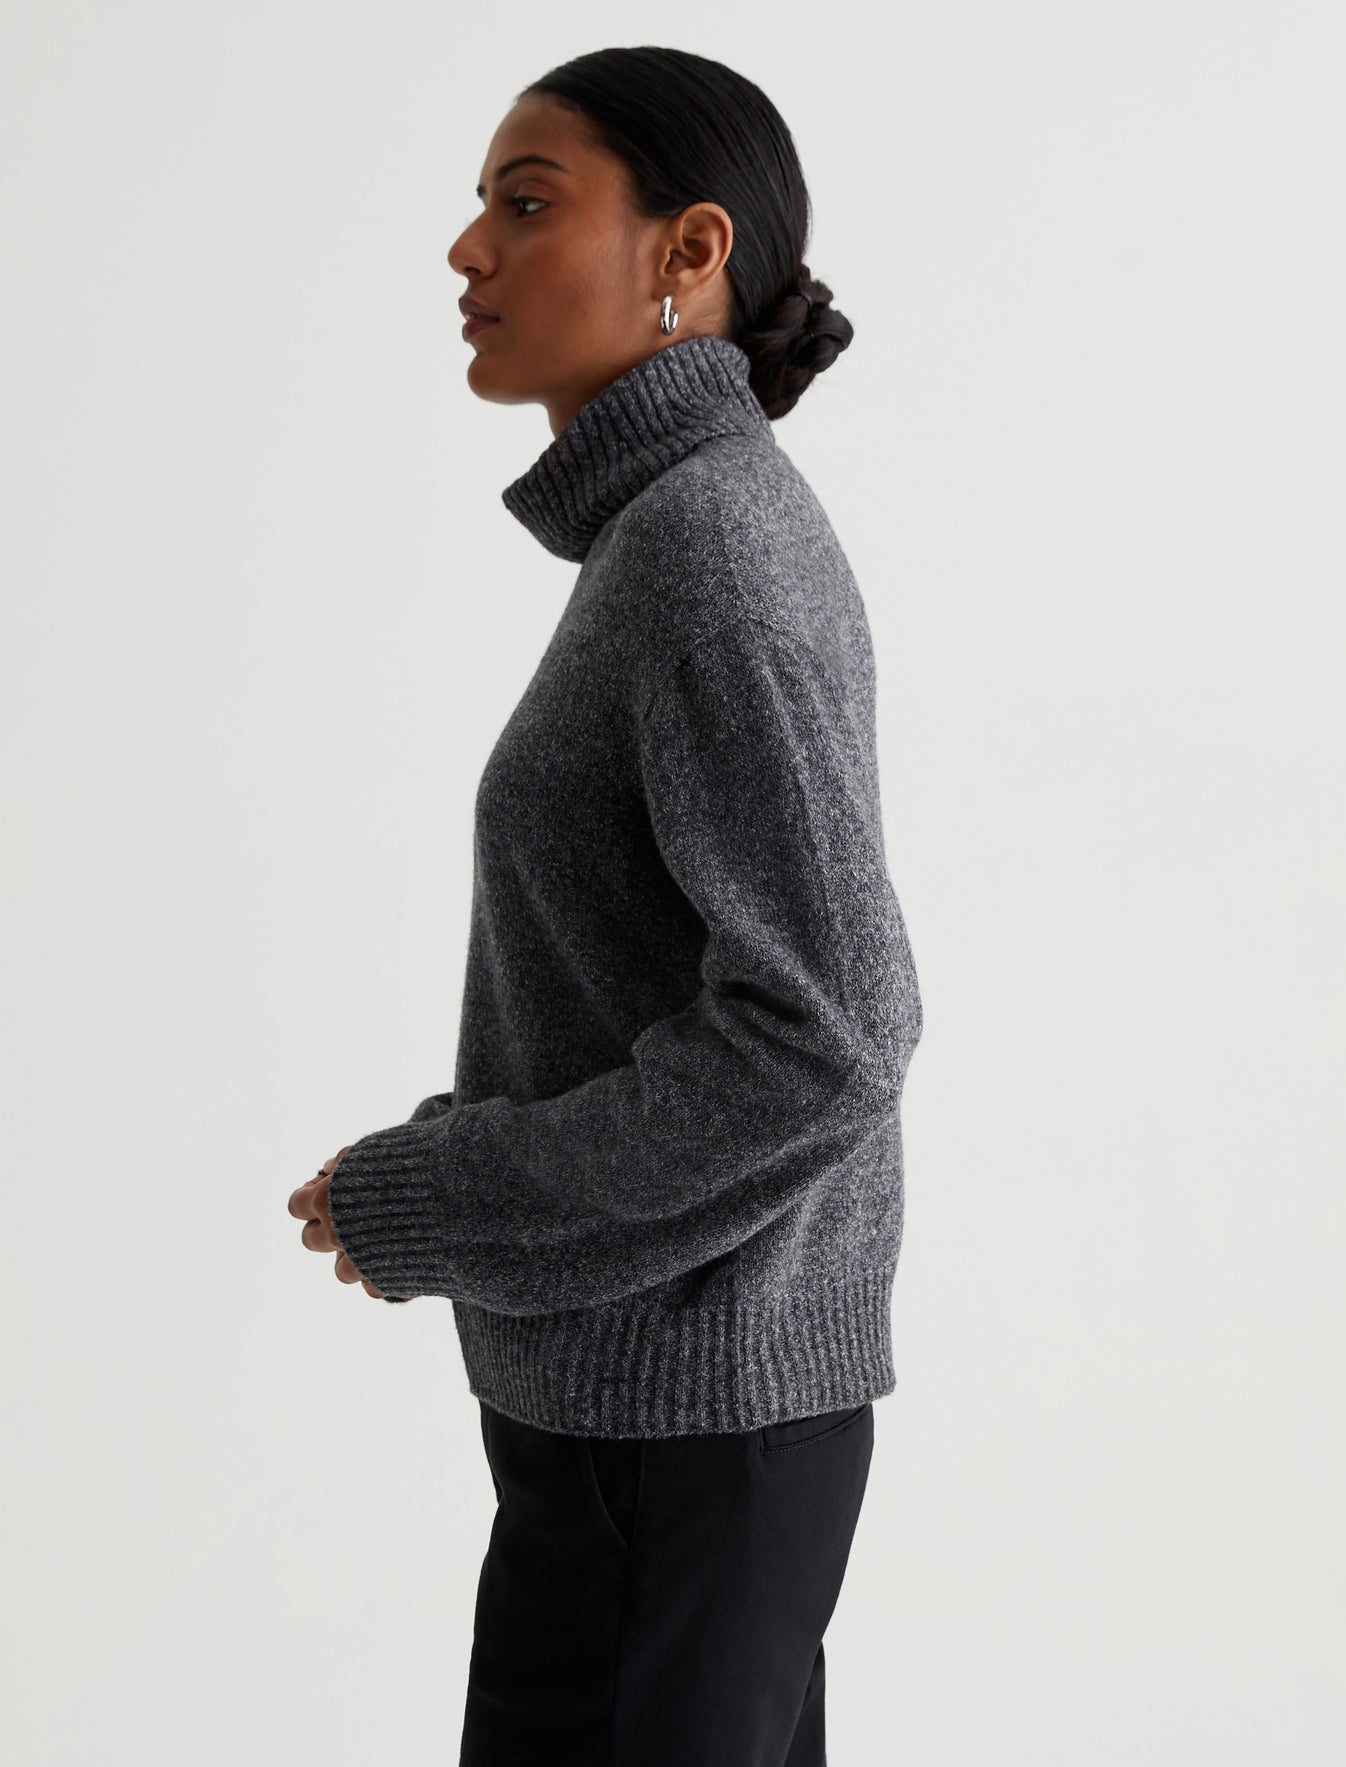 Bellona Heather Charcoal Relaxed Turtleneck Sweater Photo 5